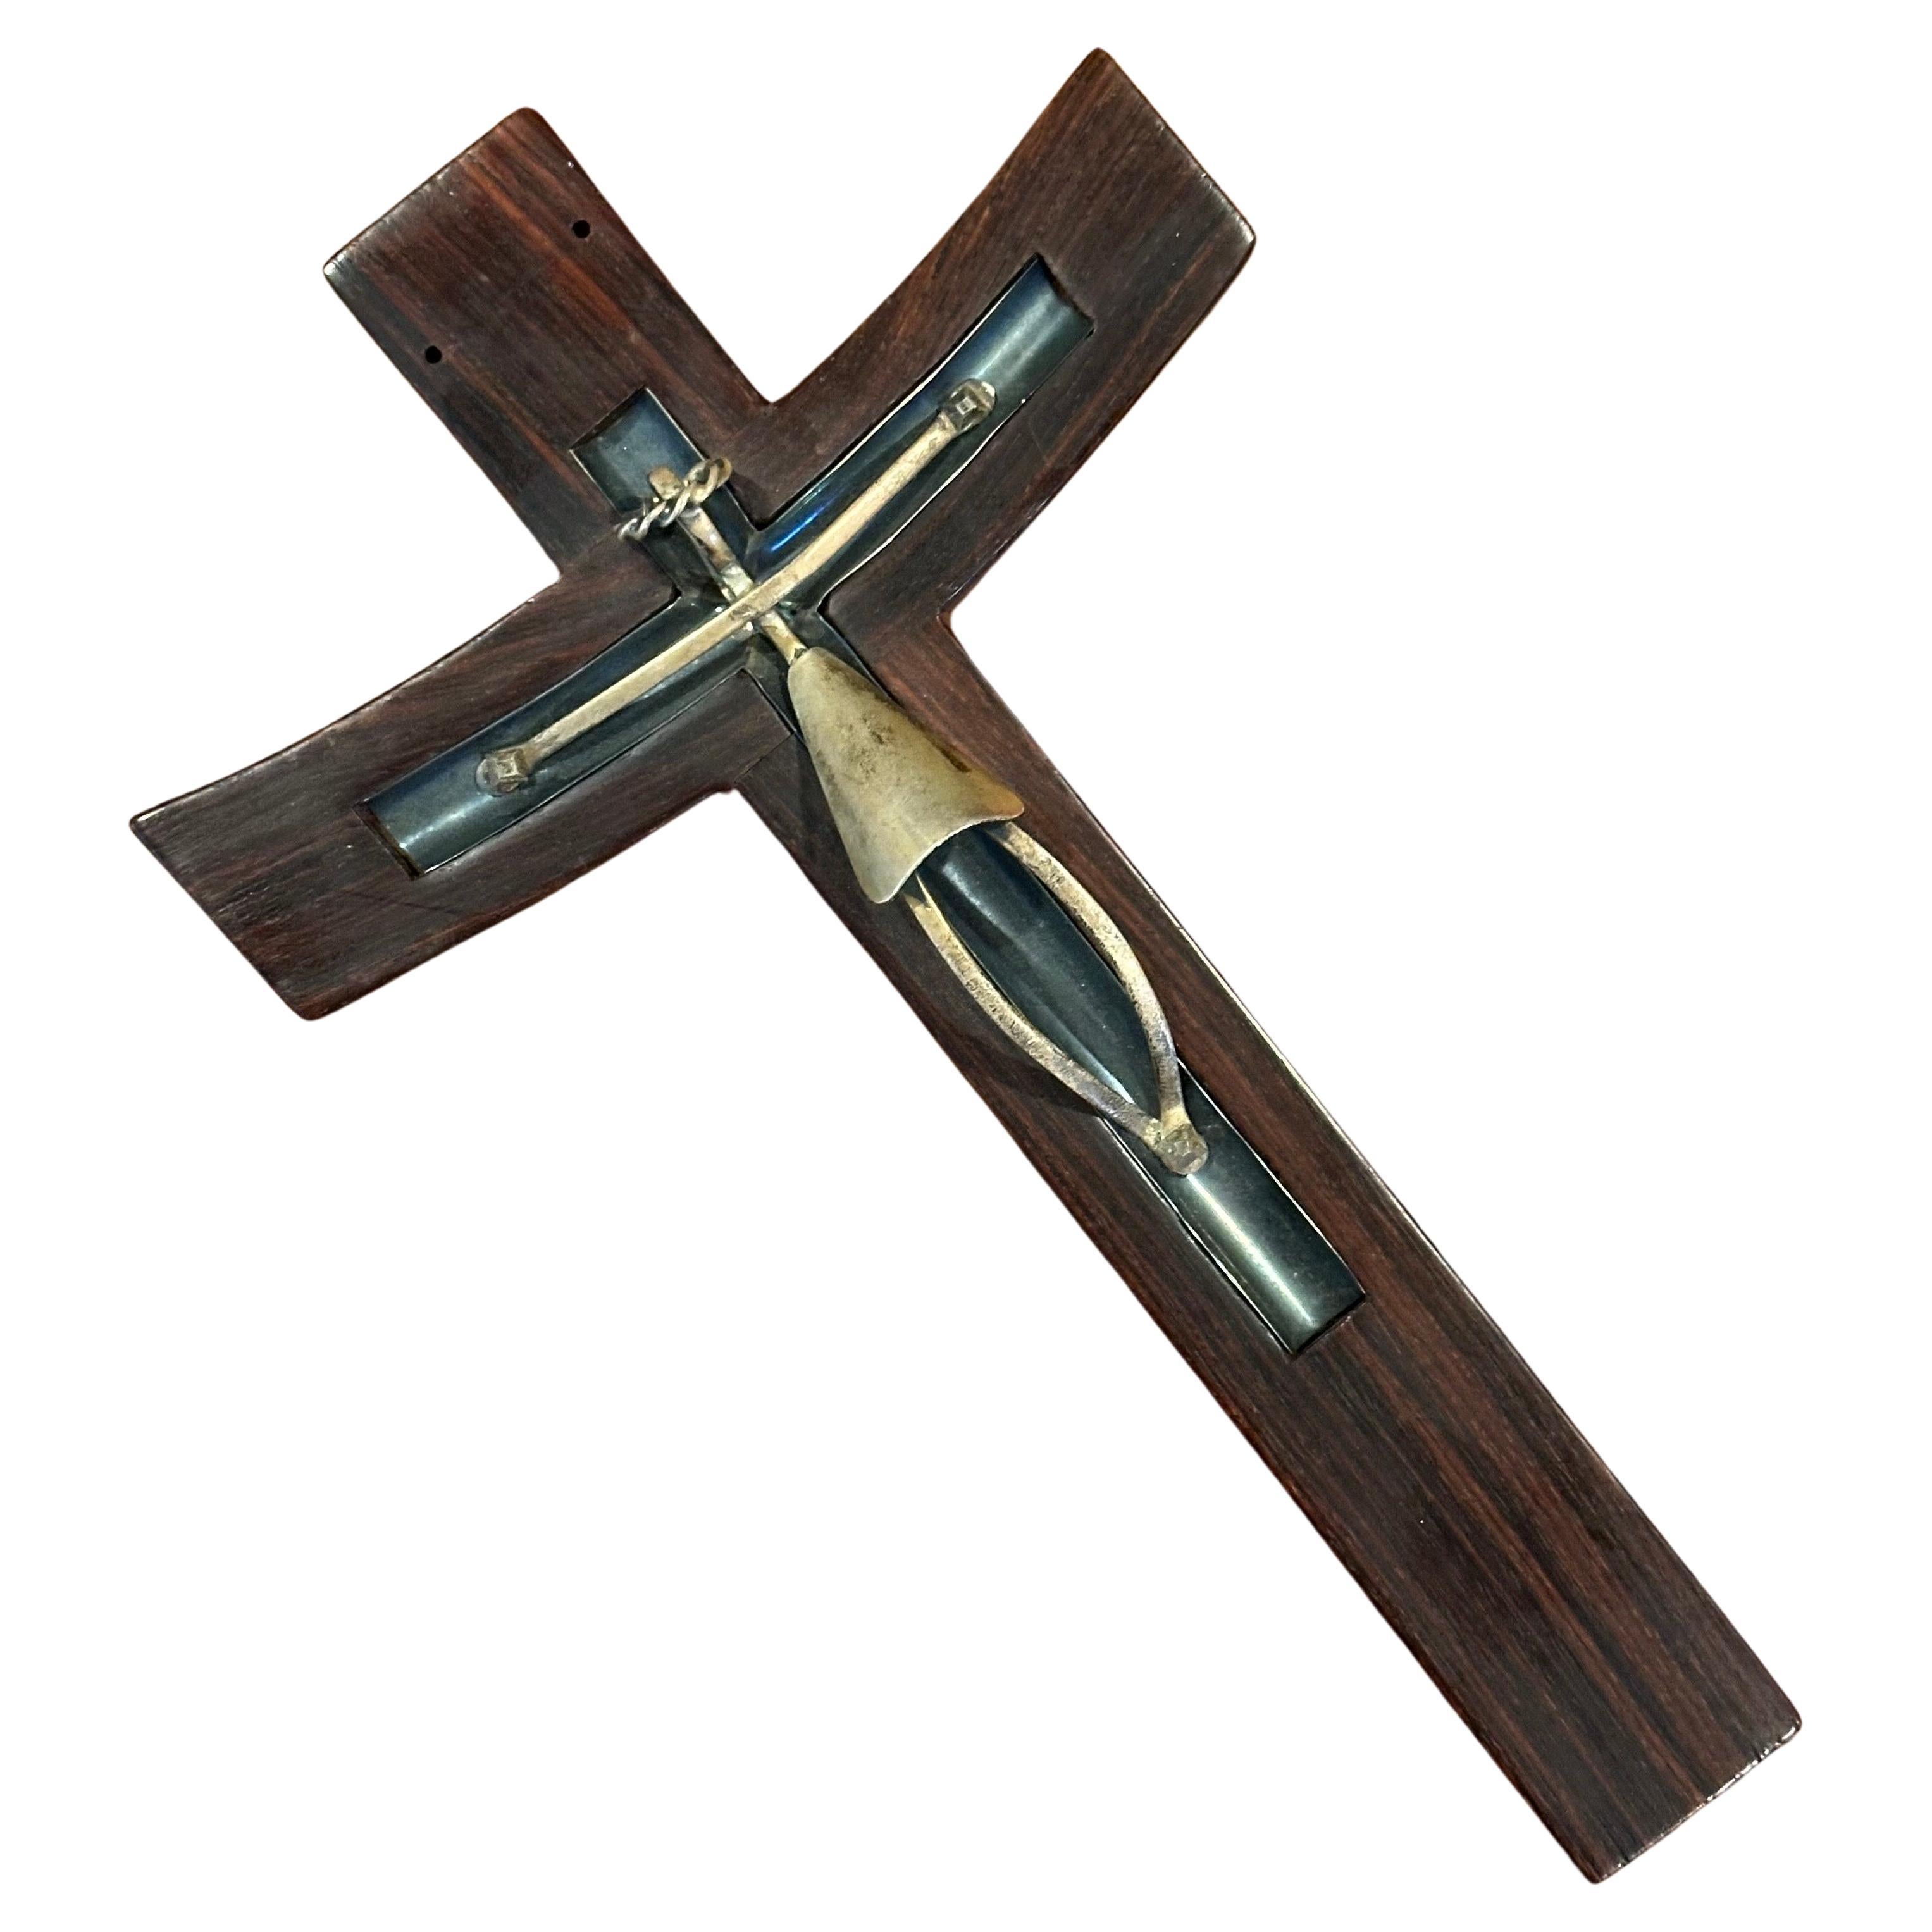 Modernist rosewood and sterling silver crucifix / cross by Taxco of Mexico, circa 1970s. The piece measures 5.75